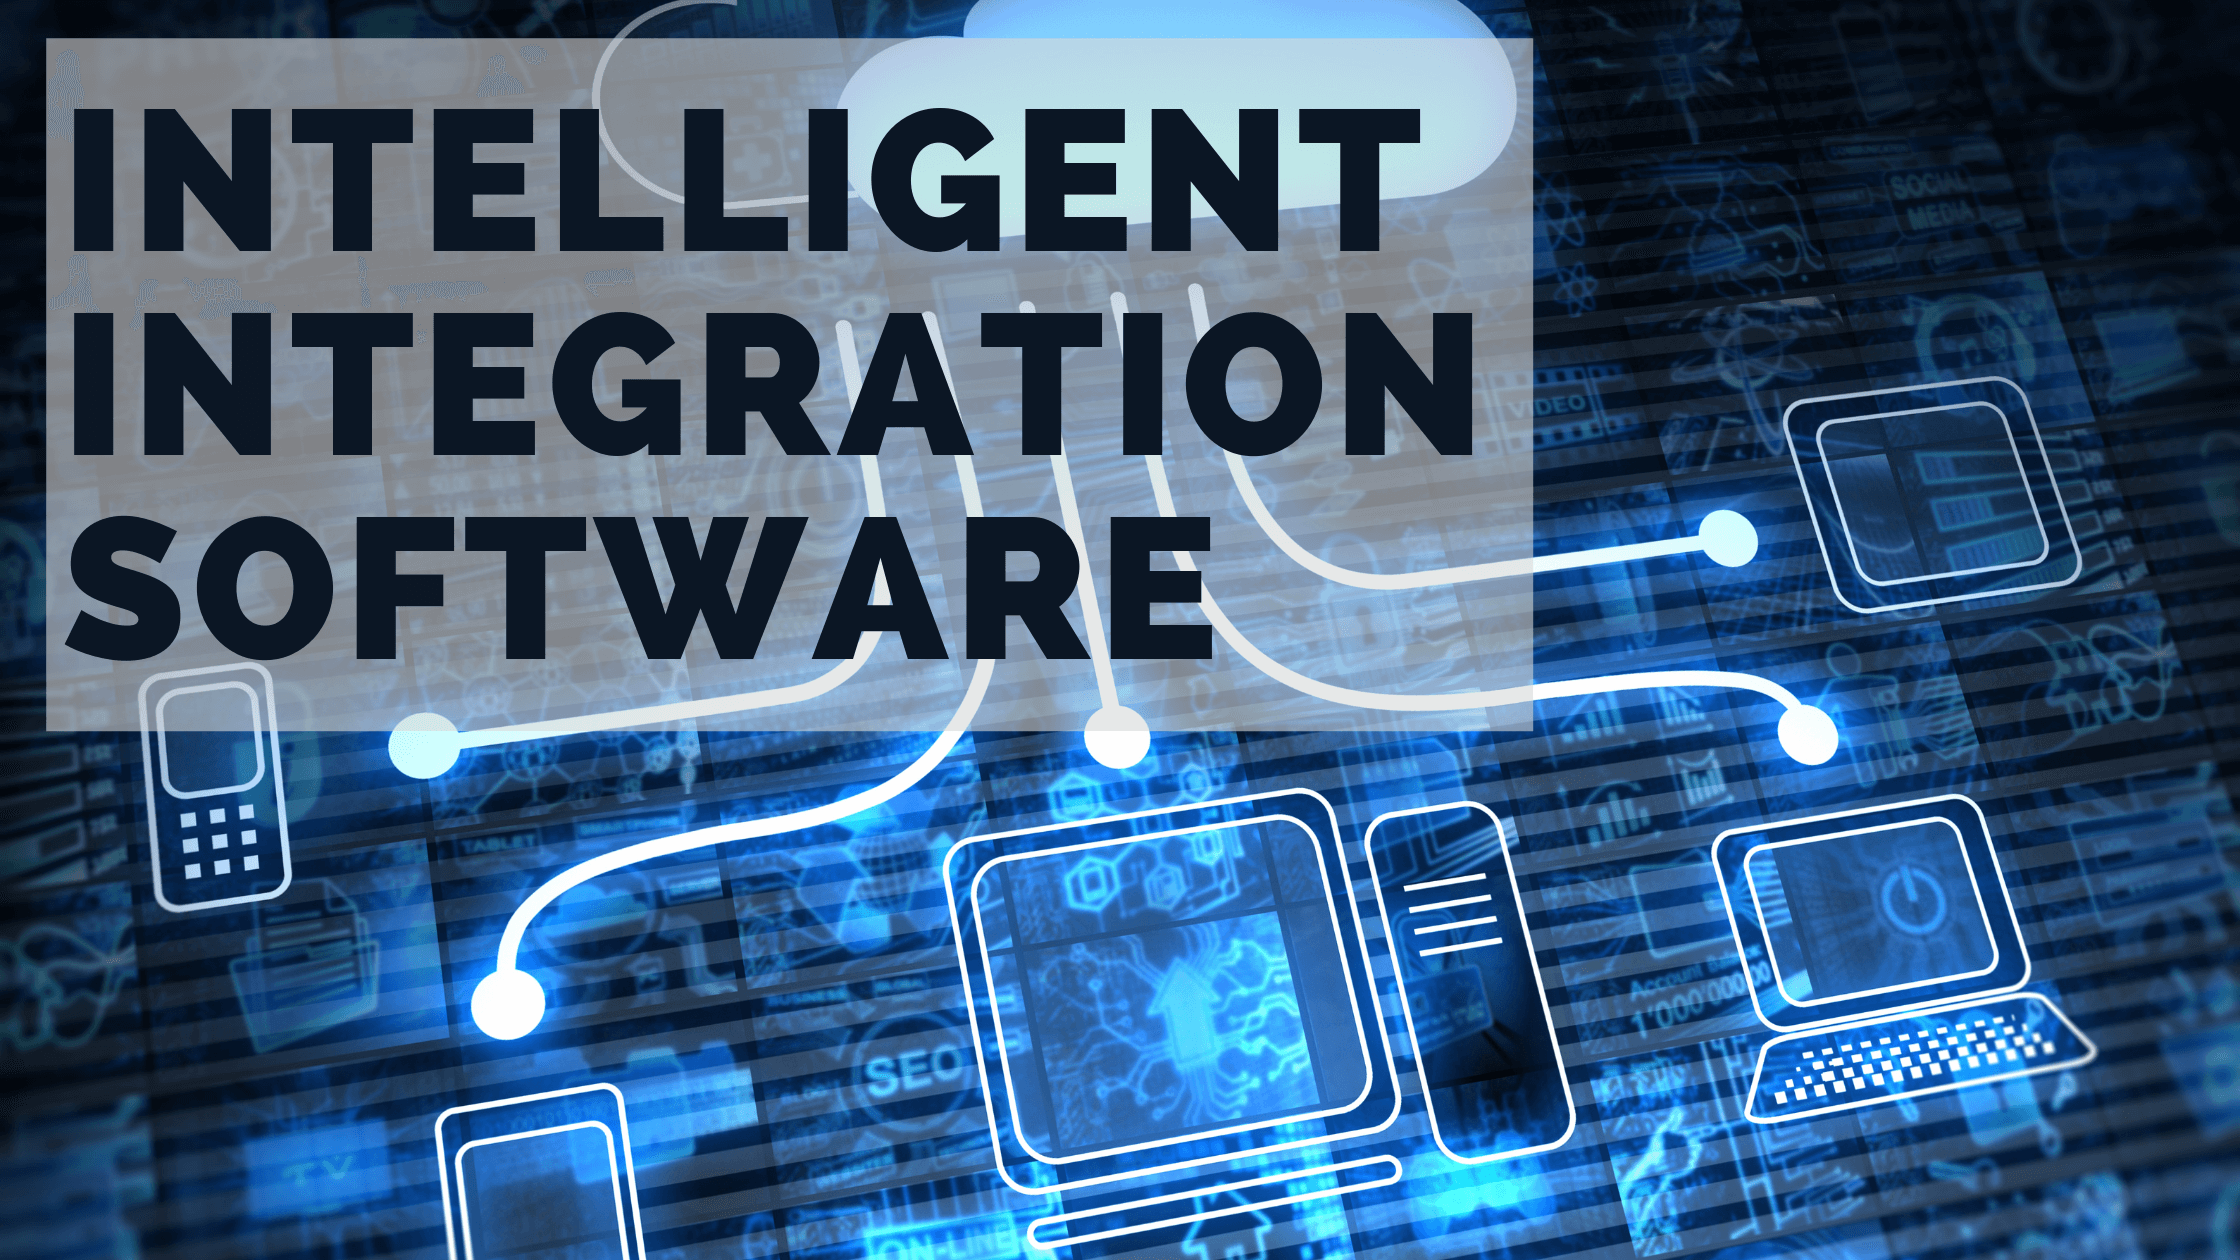 Meet Aegis – The Integration Software that’s Uniting the Industry!